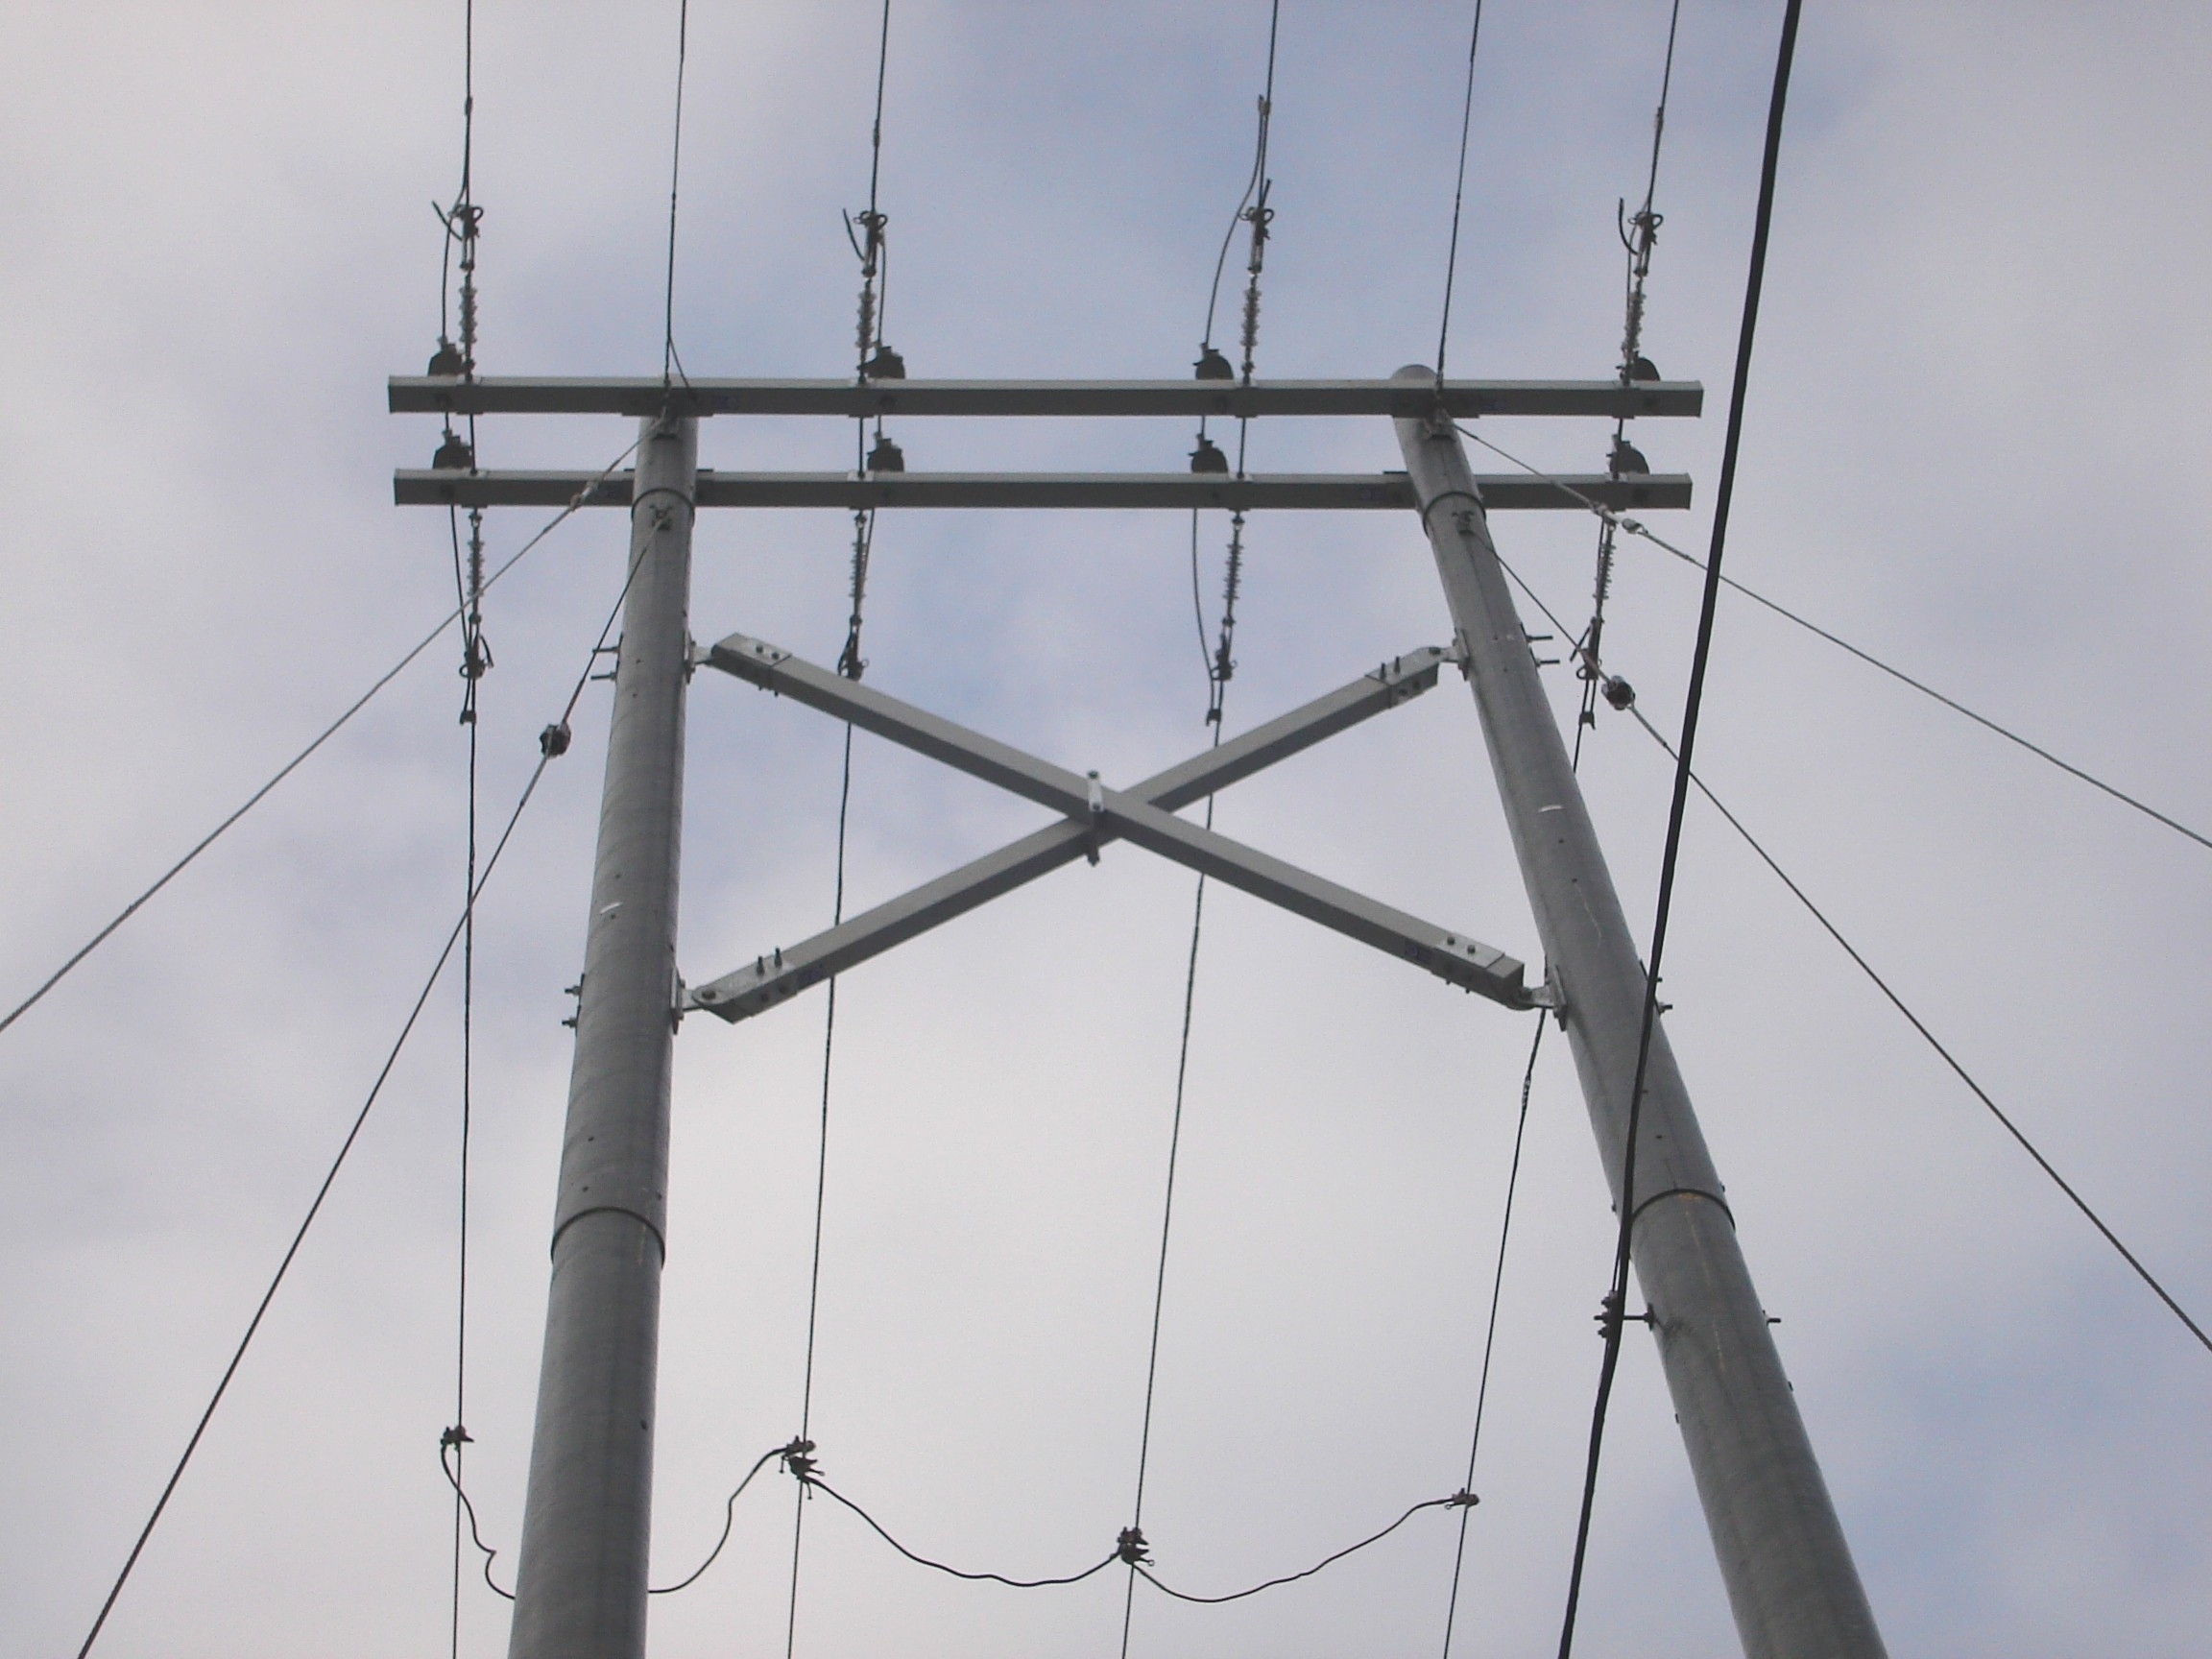 RS composite poles installed for Hydro Ottawa initiative